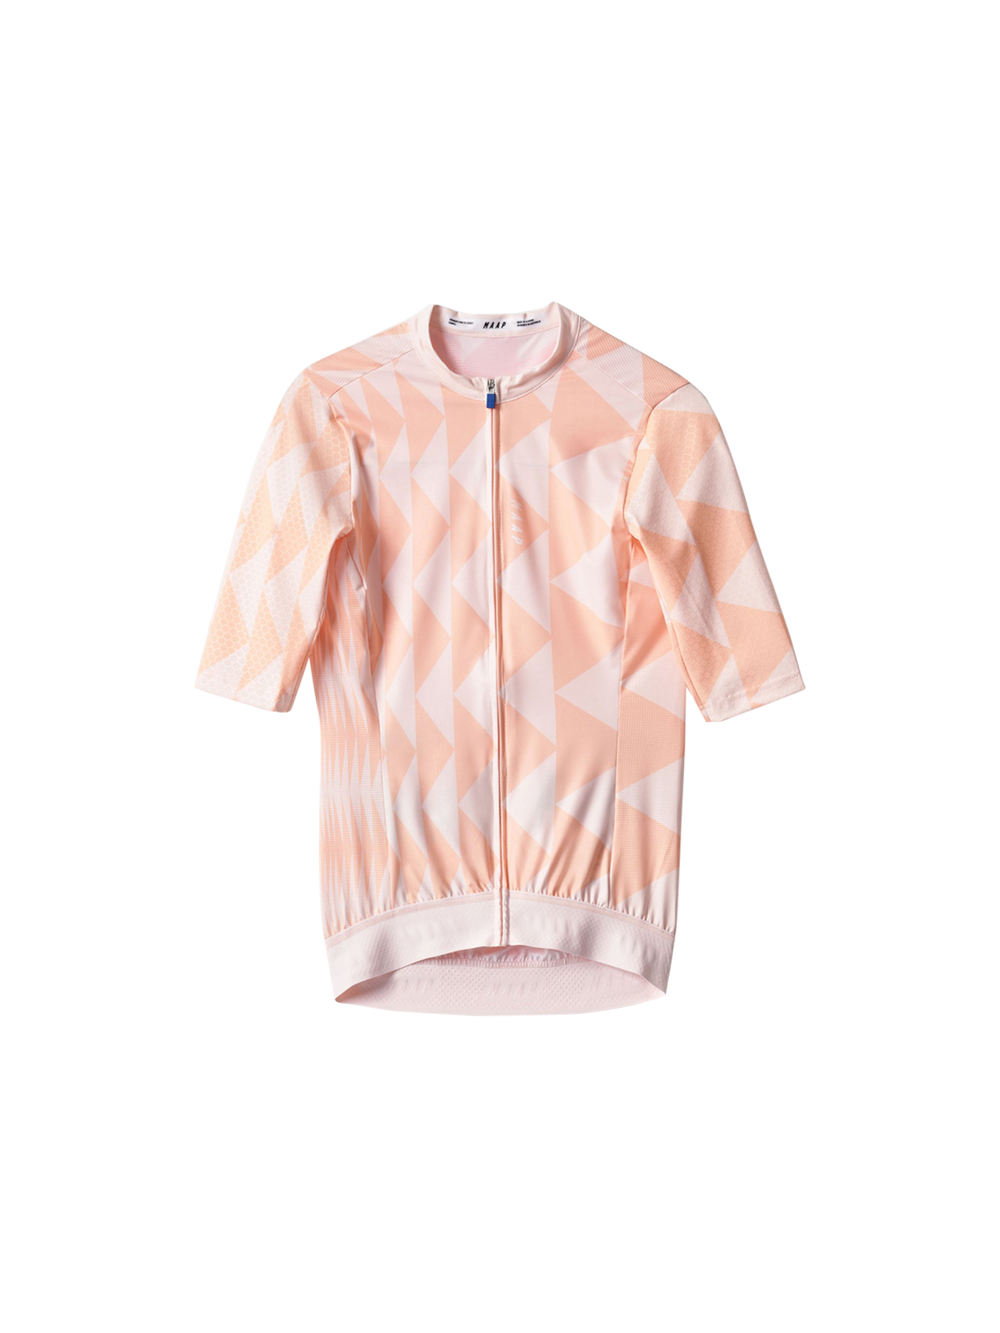 Product Image for Women's Loop Pro Jersey